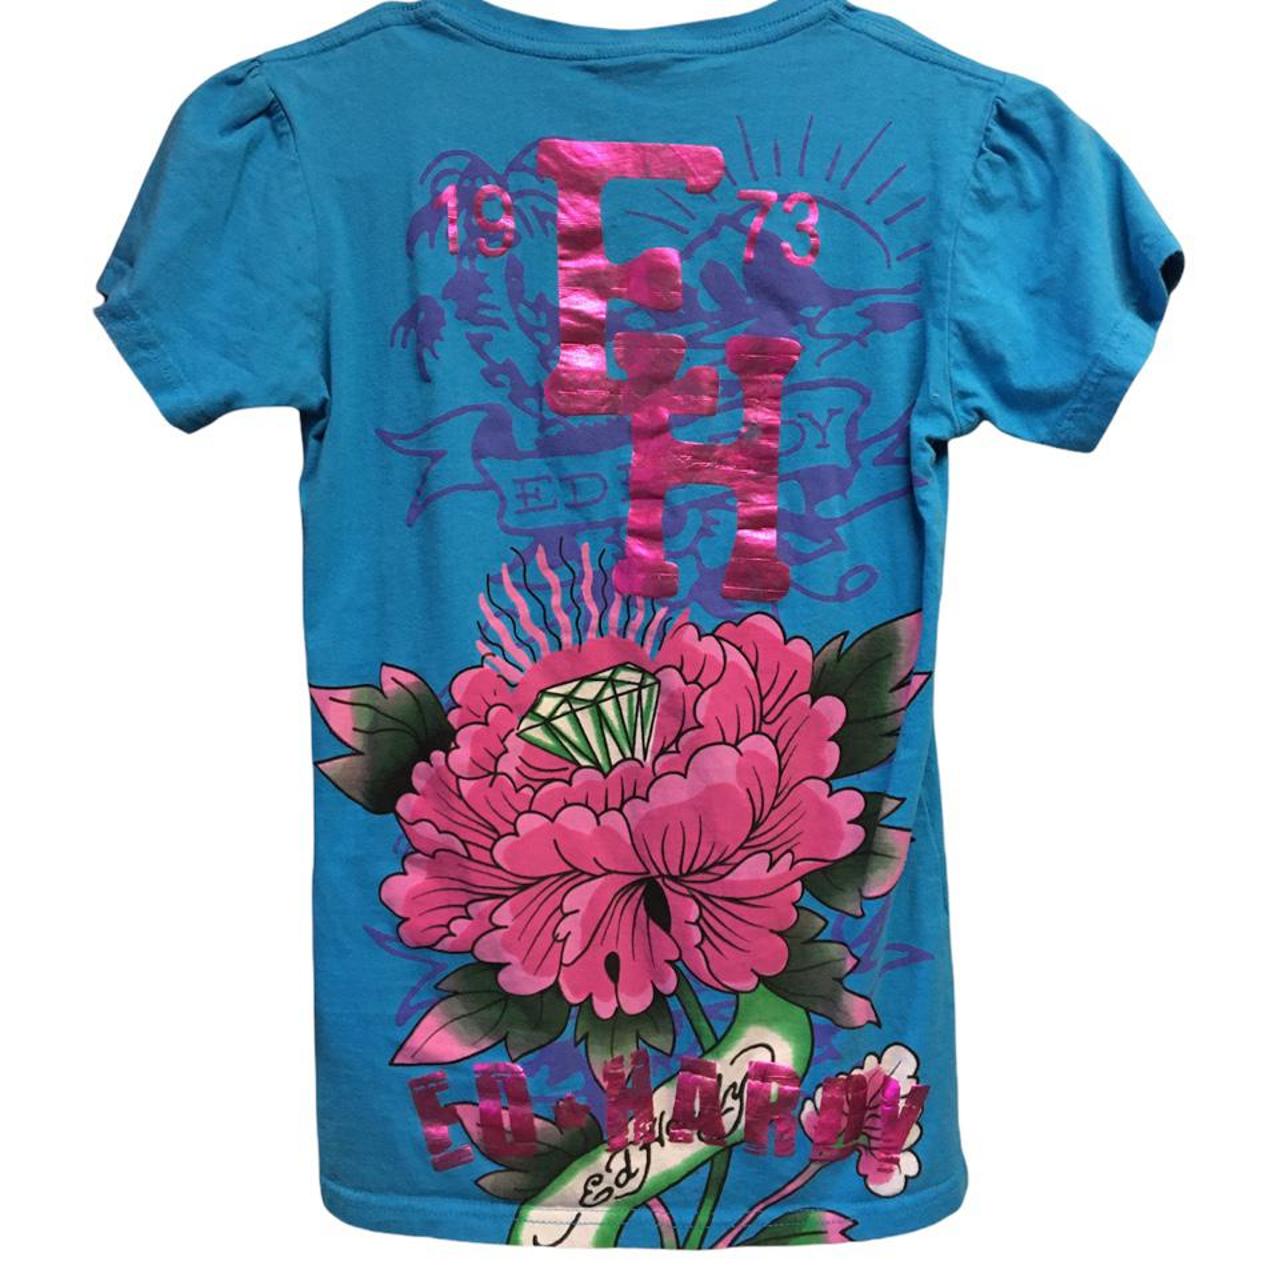 Product Image 2 - Ed hardy kids top! Would